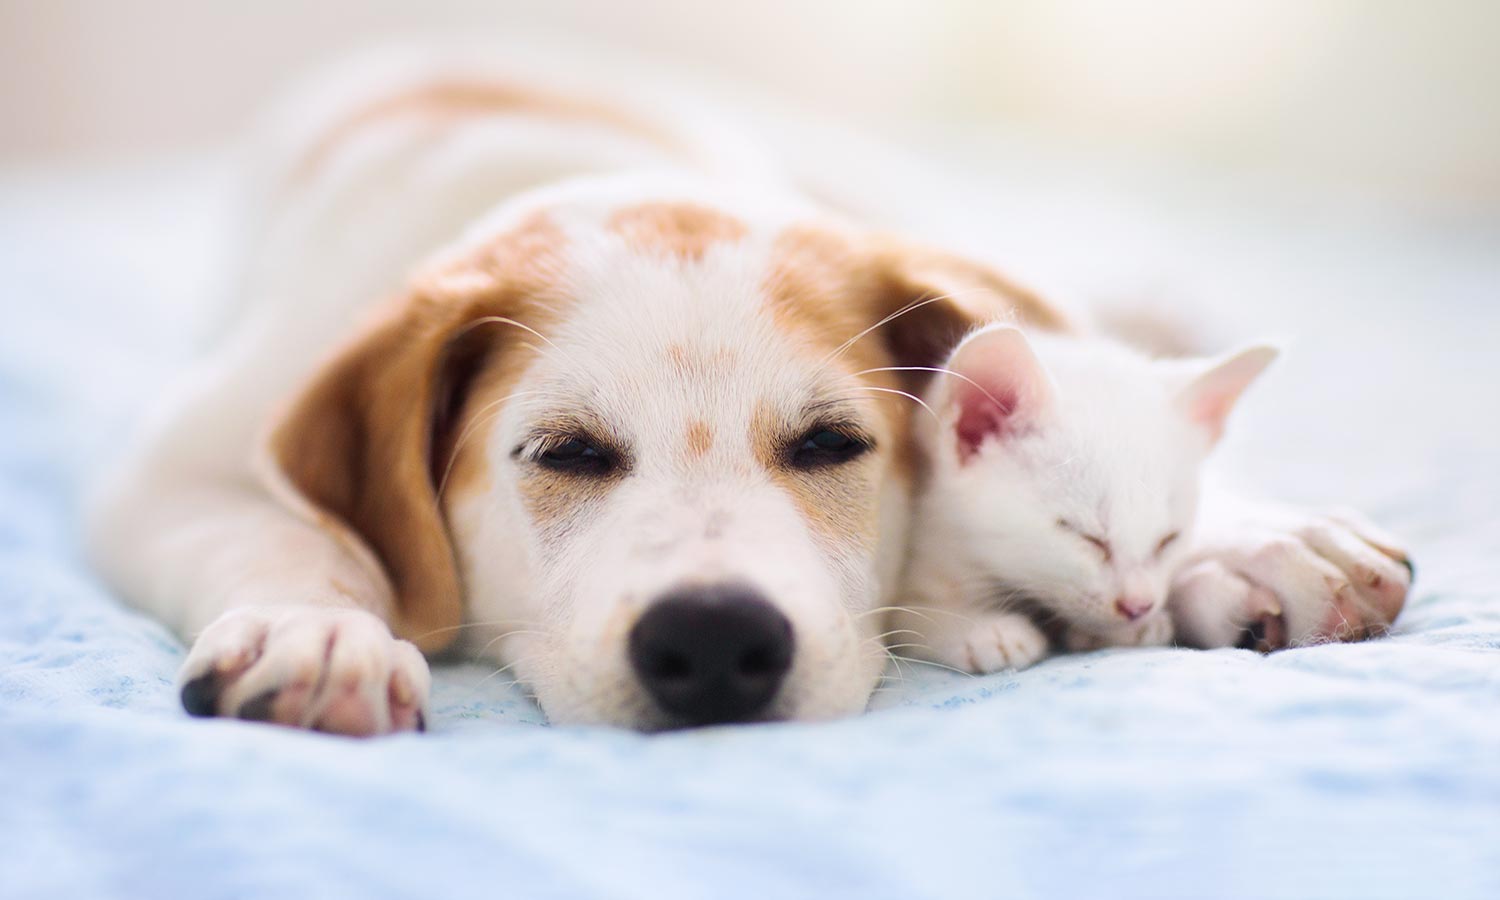 A dog and cat sleeping inside